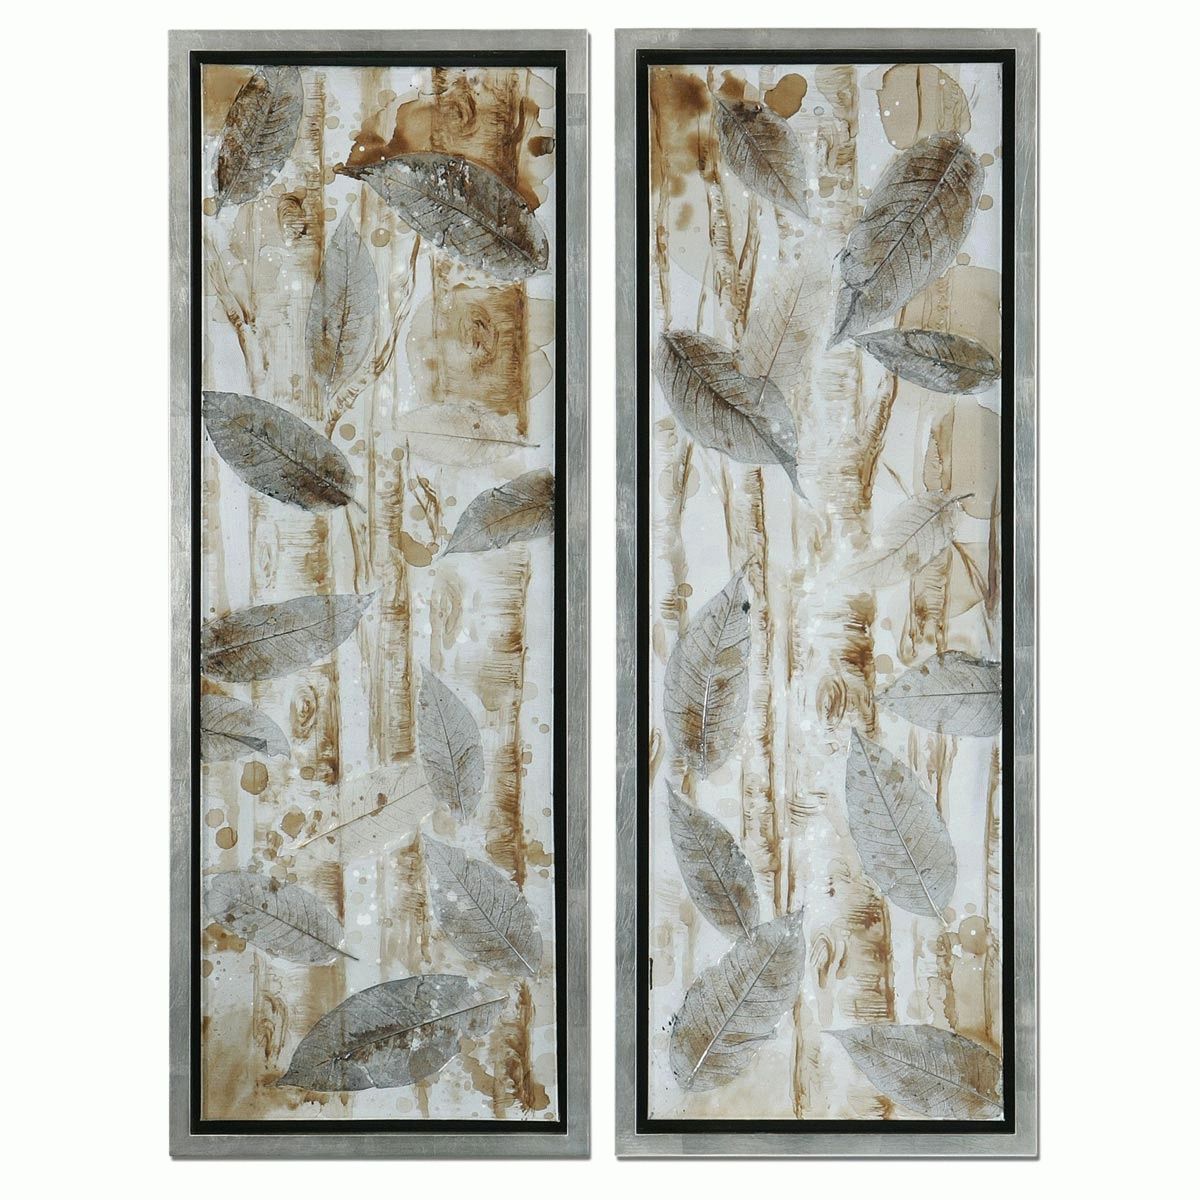 Pressed Leaves Framed Wall Art – Set Of 2 With Most Current Rectangular Canvas Wall Art (View 15 of 15)